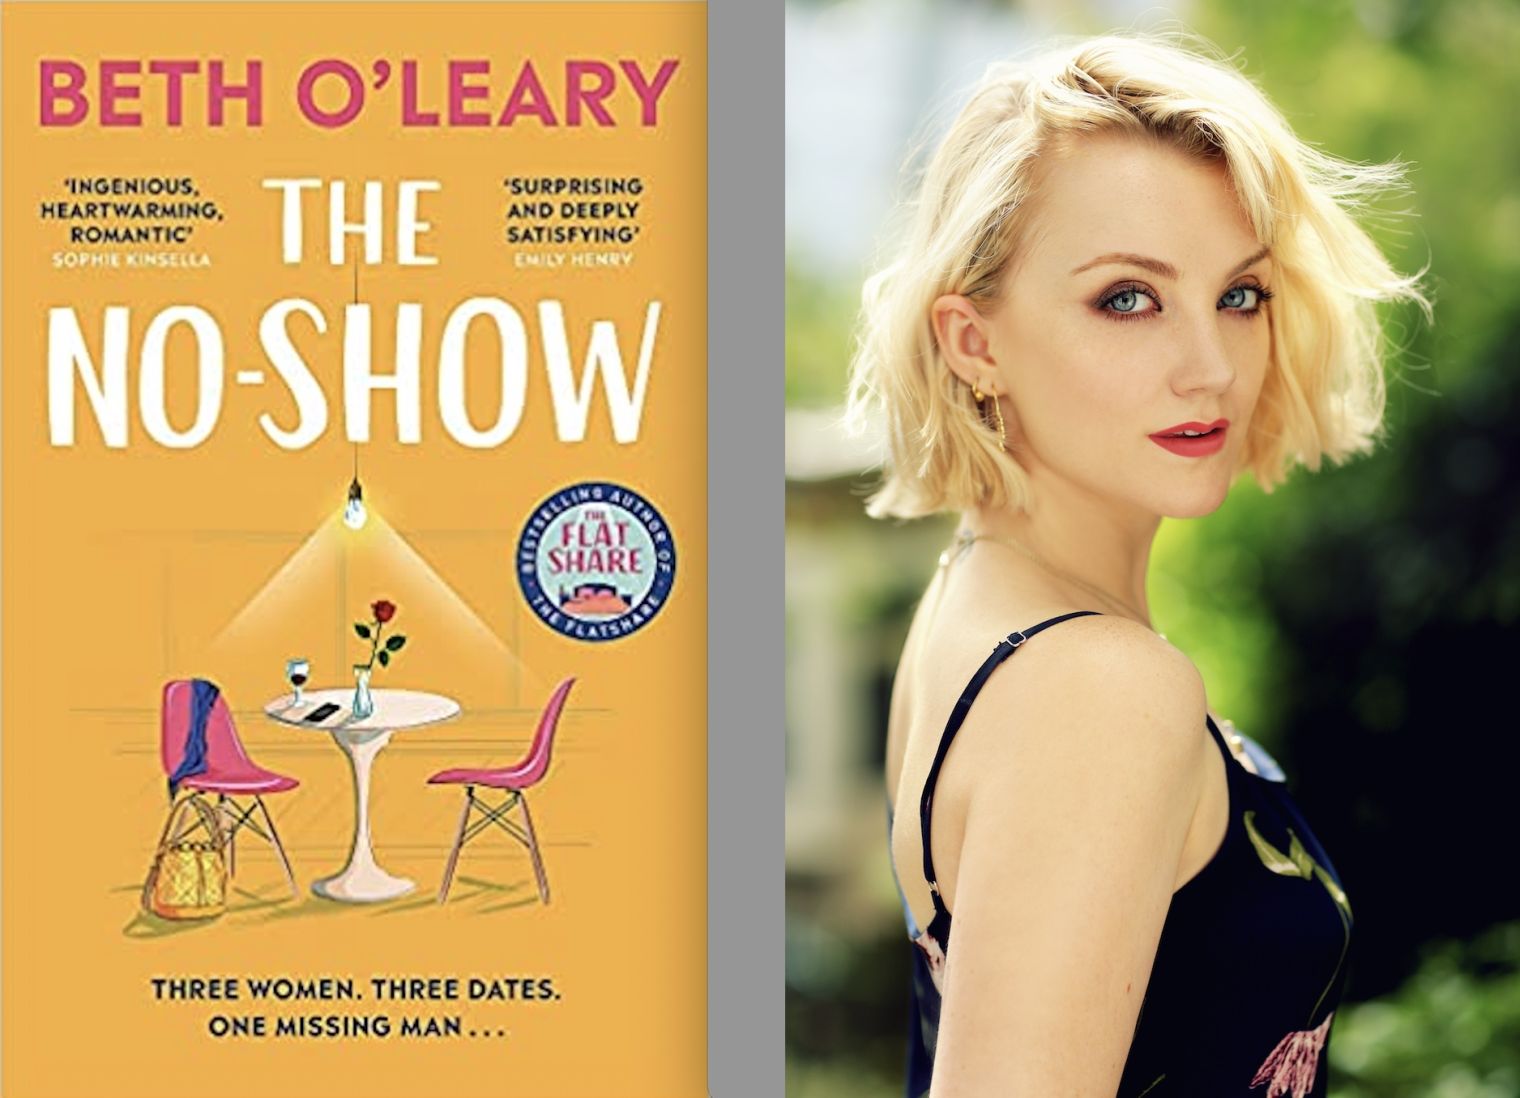 Evanna Lynch to narrate the voice of Siobhan in the audio edition of new novel 'The No-Show' by bestselling author Beth O'Leary